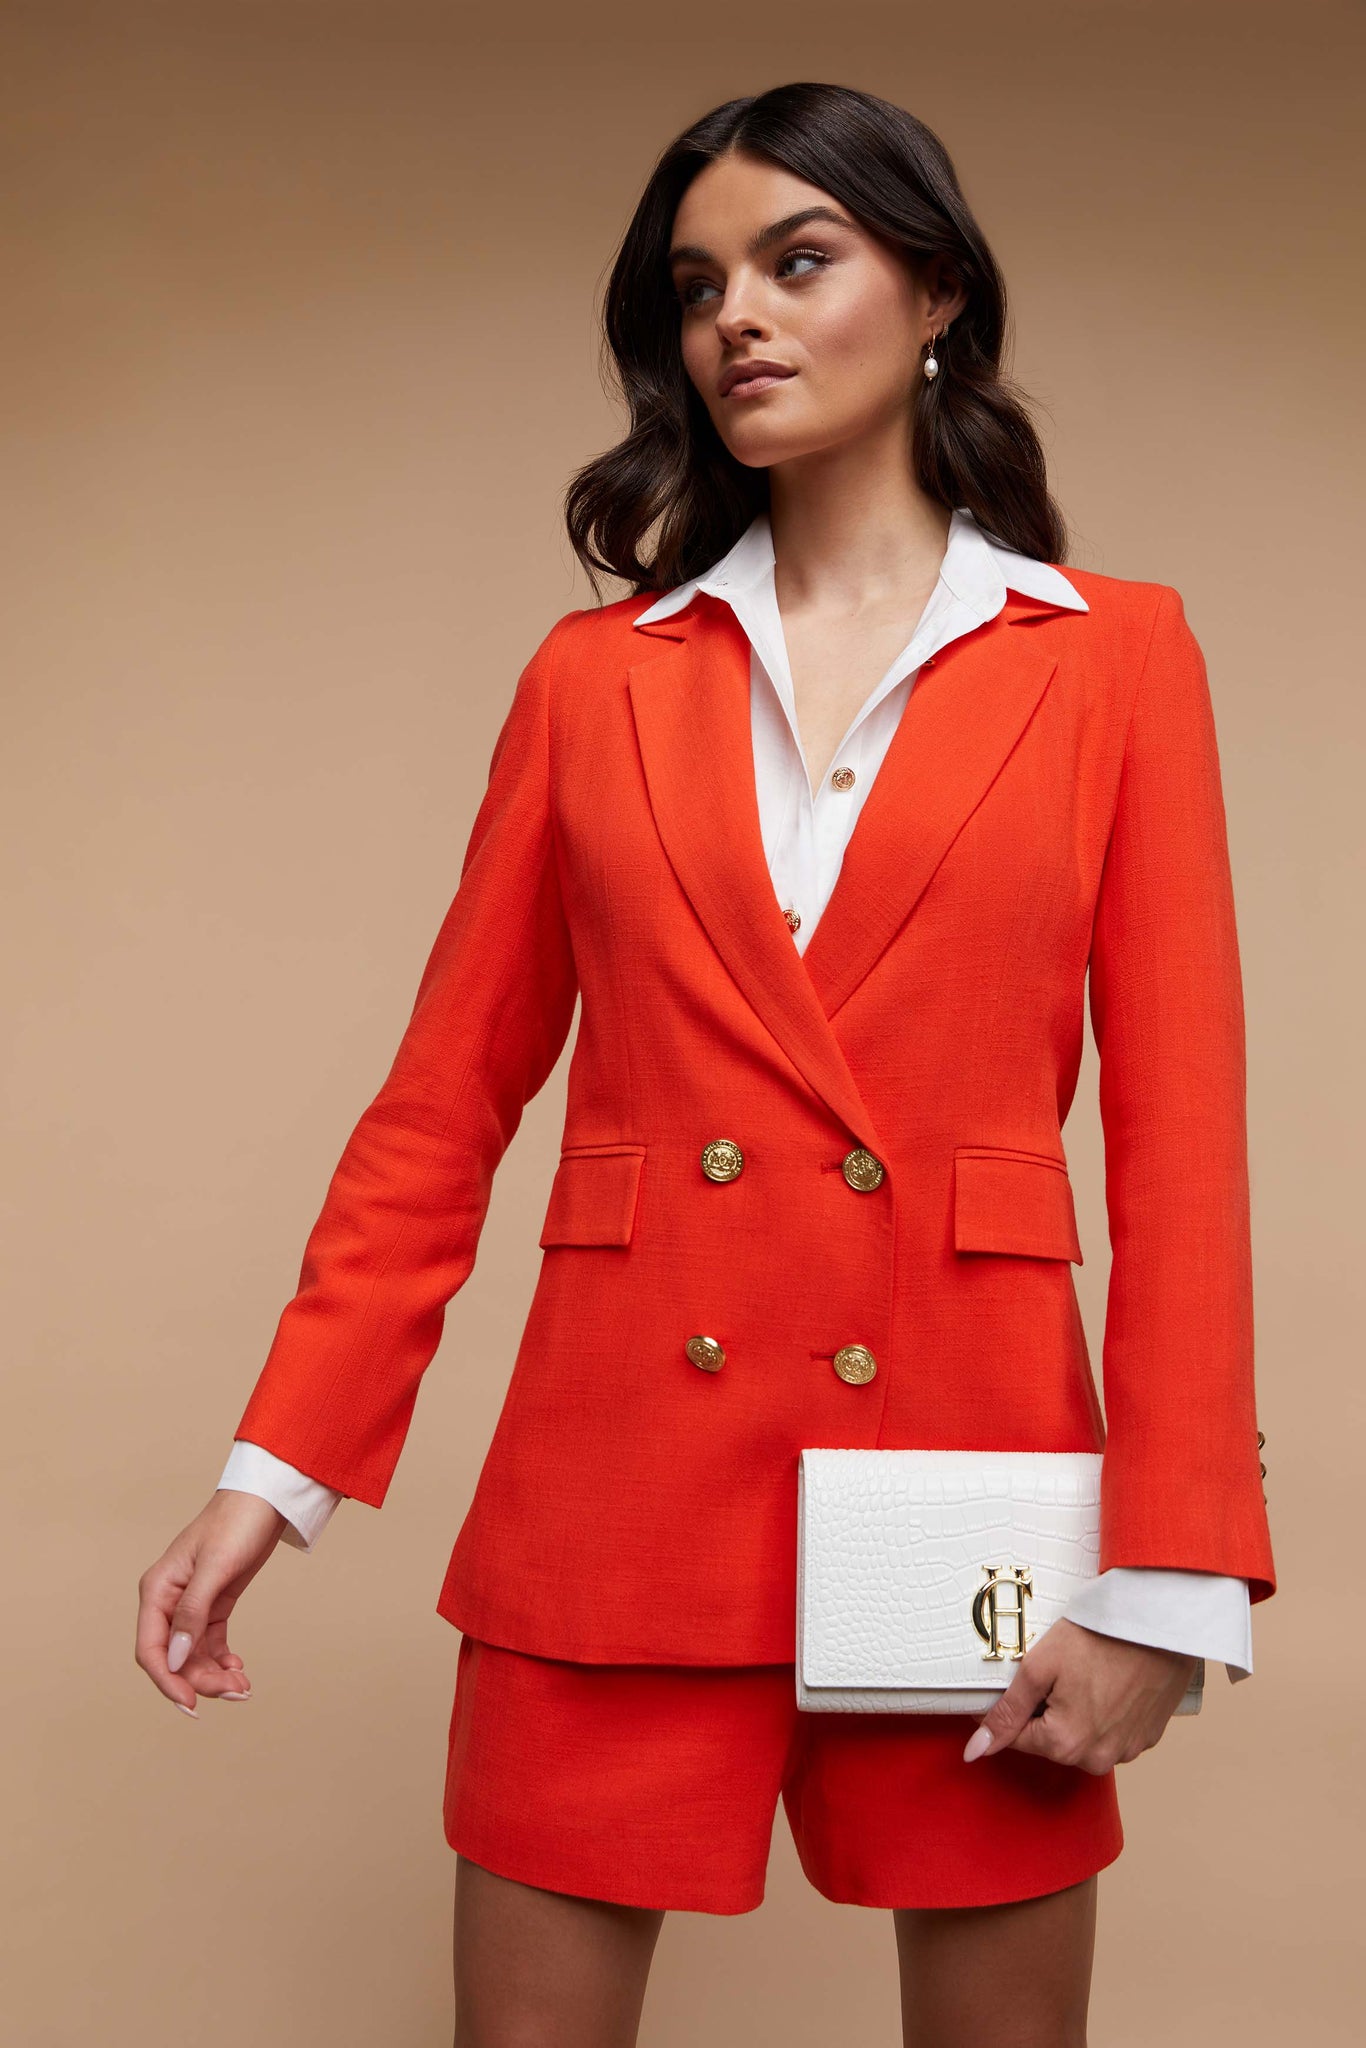 womens orange linen tailored shorts with two single knife pleats and centre front zip fly fastening with two gold stud buttons worn with matching orange double breasted linen blazer and white croc embossed clutch bag